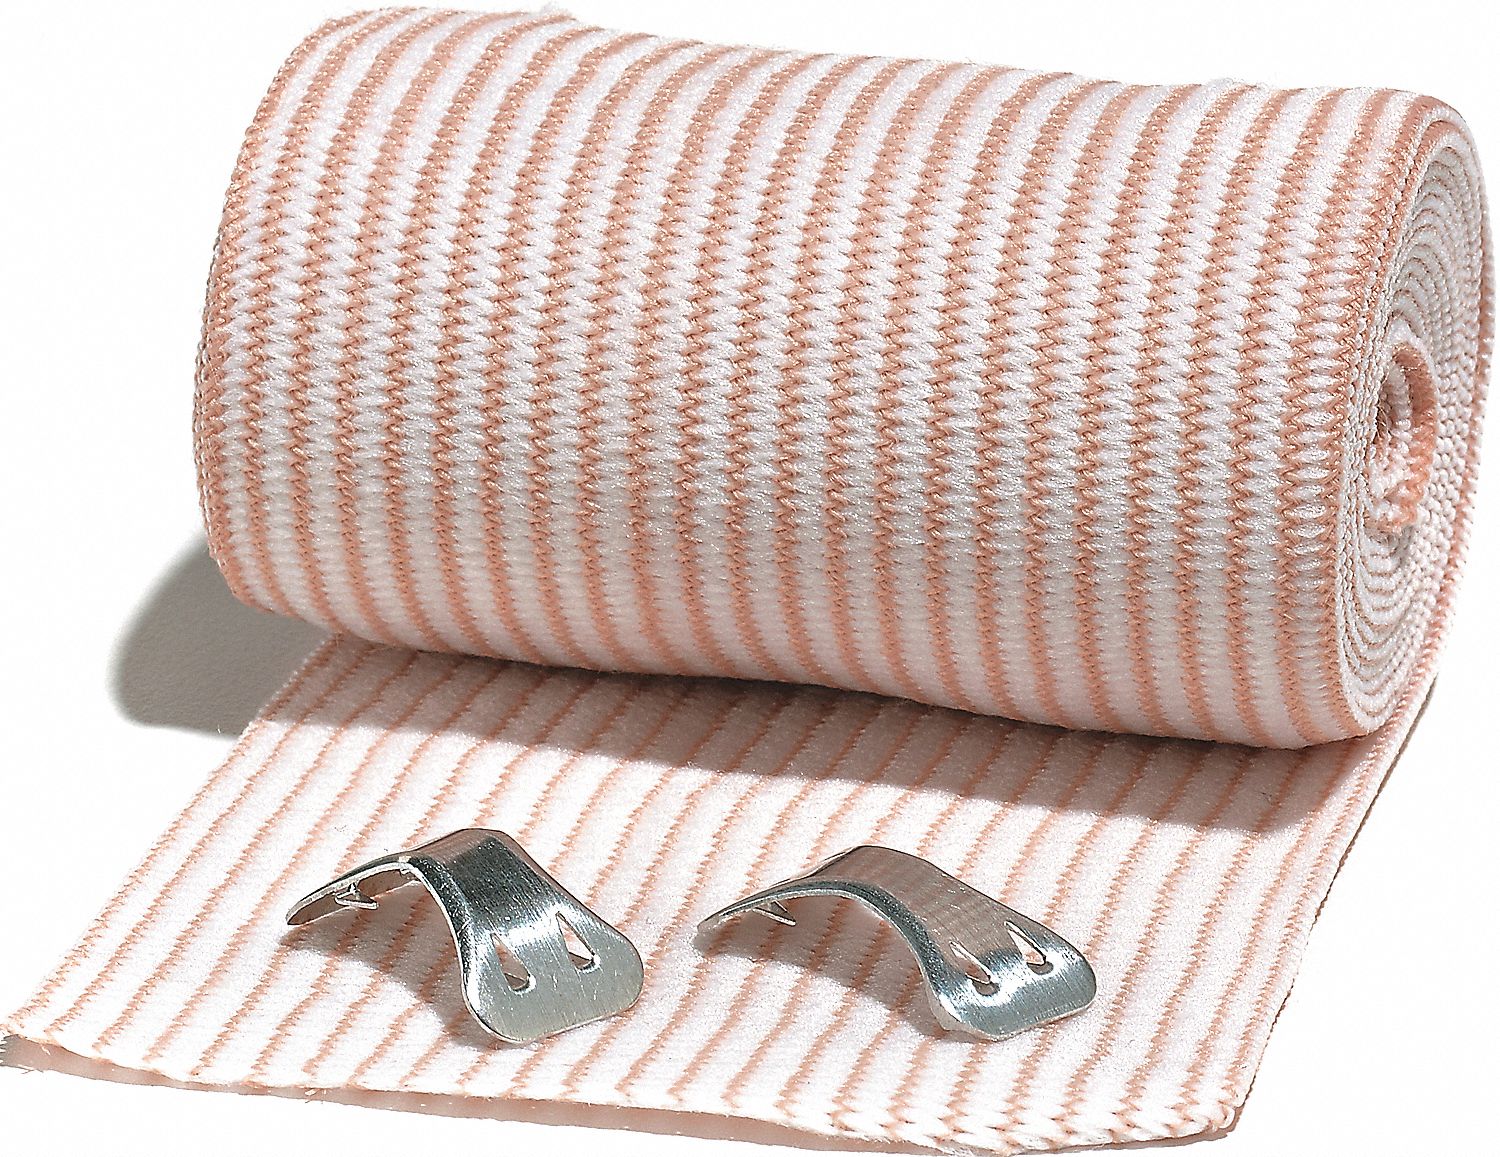 TENSOR BANDAGE, REUSABLE, LIGHTWEIGHT, TENSION/COMPRESSION, FIRM SUPPORT, 3 IN X 5 YD, ELASTIC,